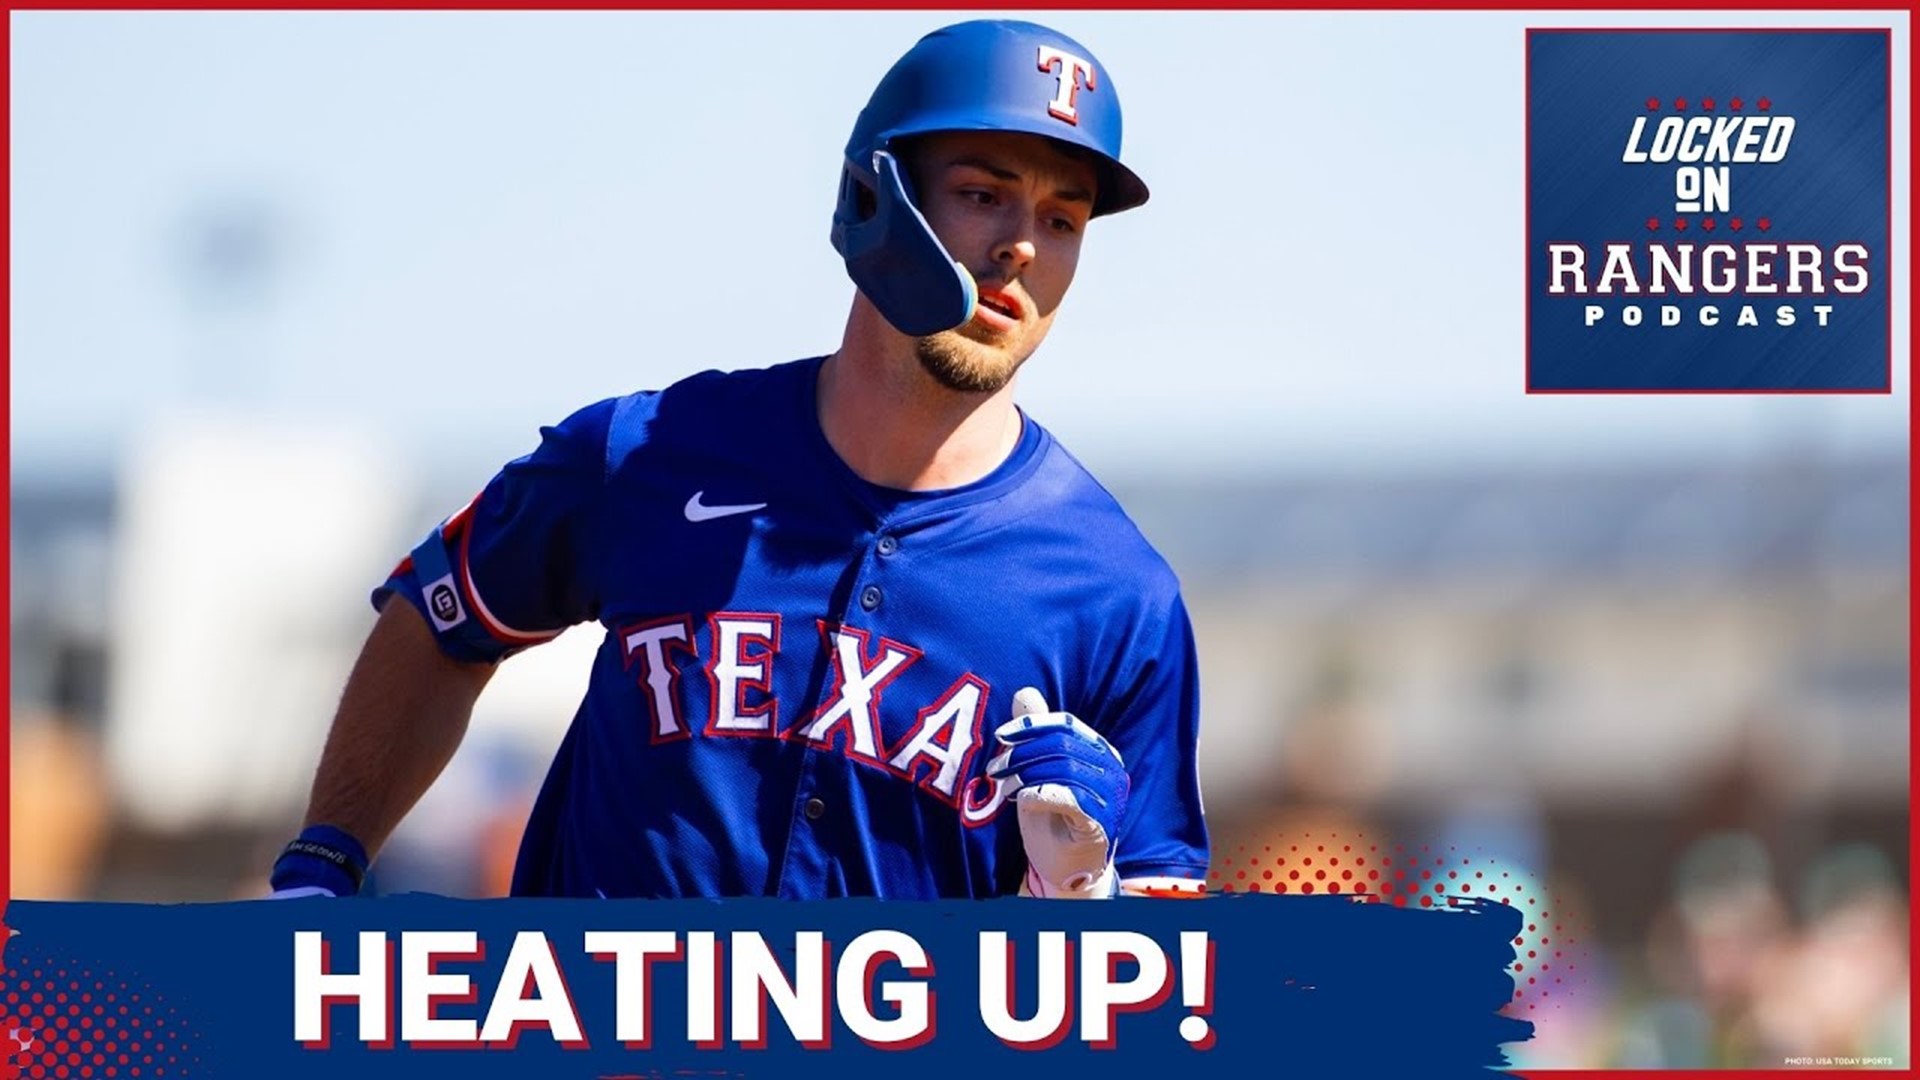 Texas Rangers rookie Evan Carter's strong spring shows why he could